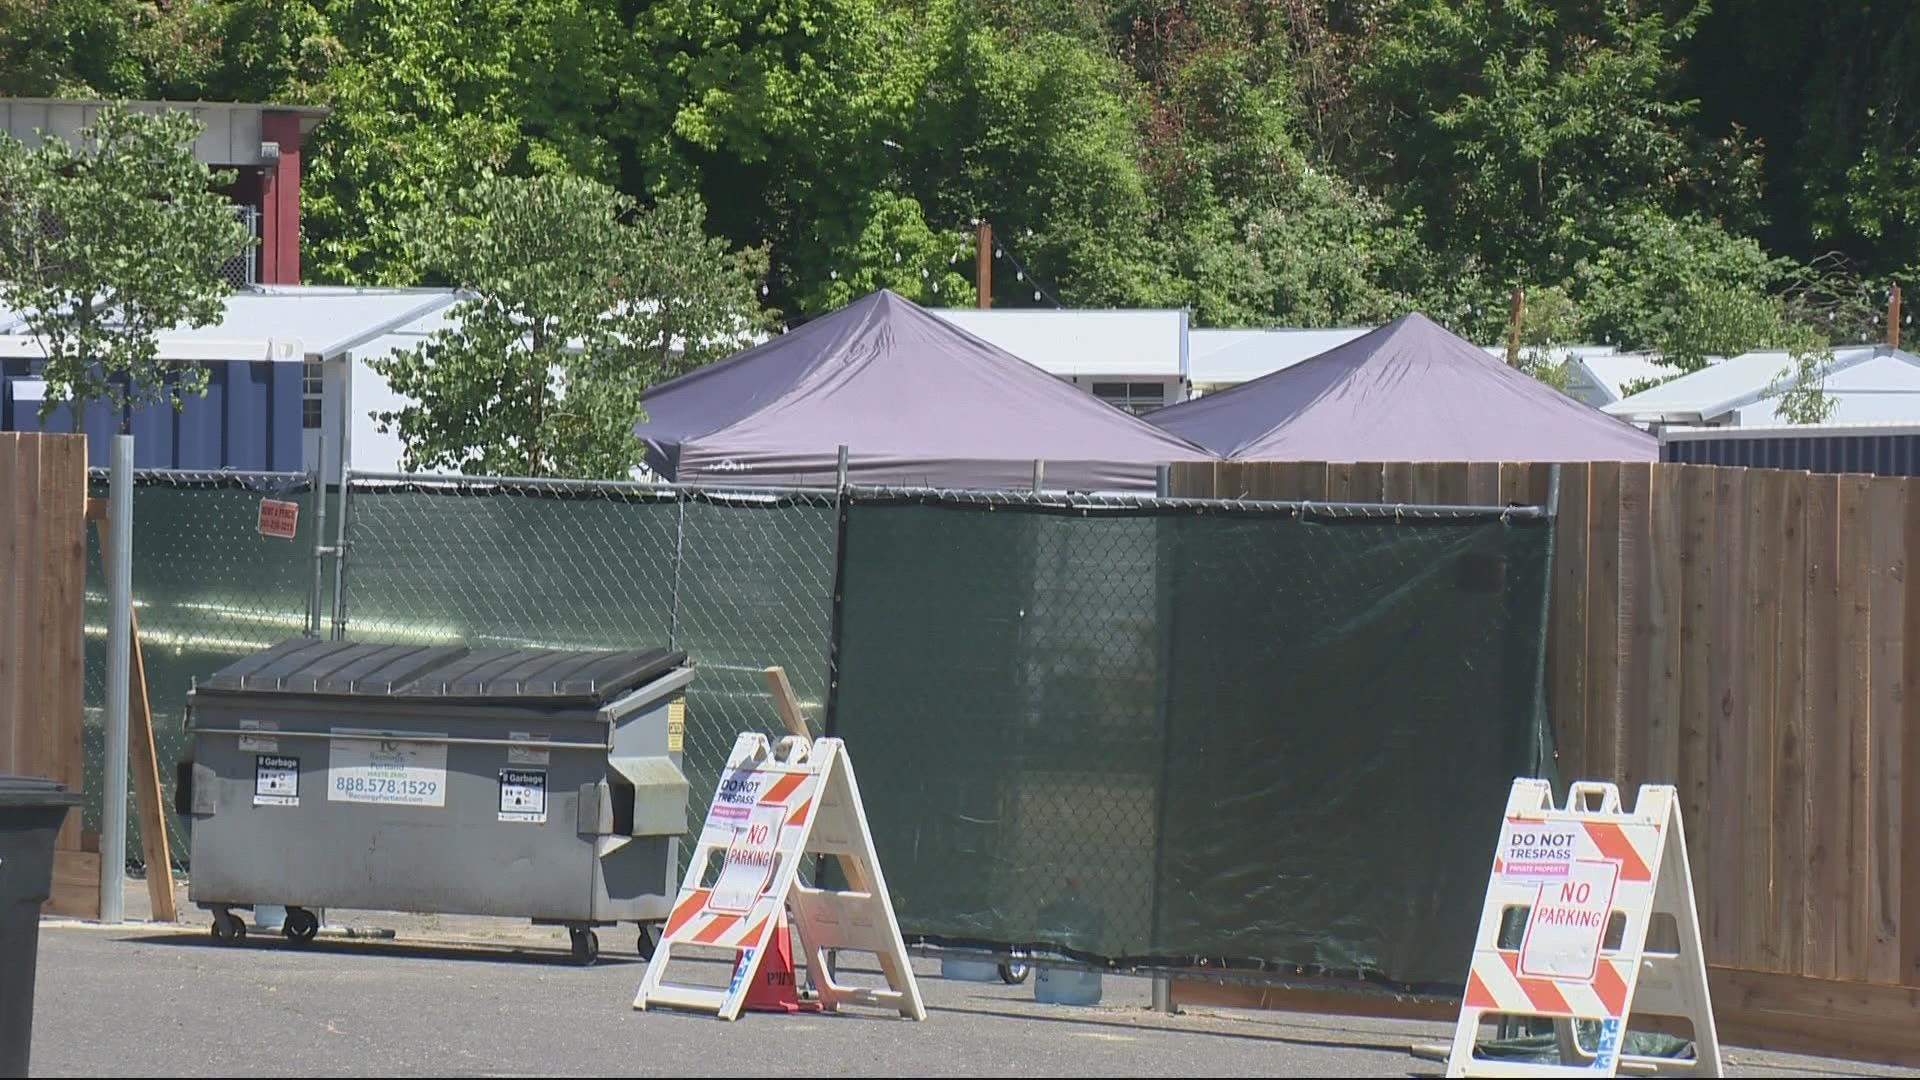 The federal government allowed the city of Portland to use the property for emergency management, and says the homeless village violates that agreement.